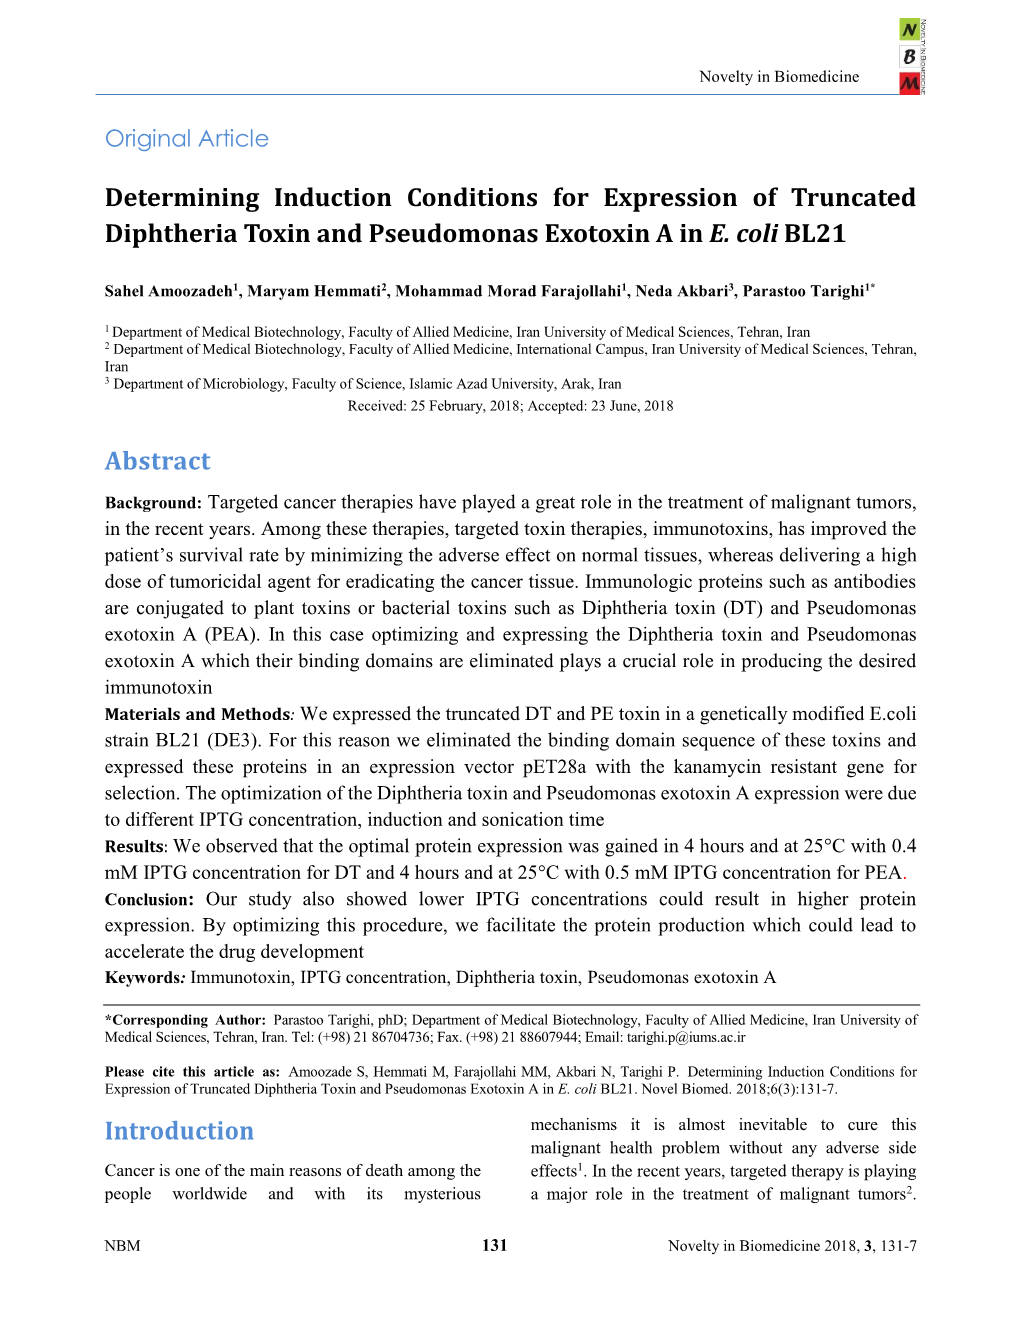 Determining Induction Conditions for Expression of Truncated Diphtheria Toxin and Pseudomonas Exotoxin a in E